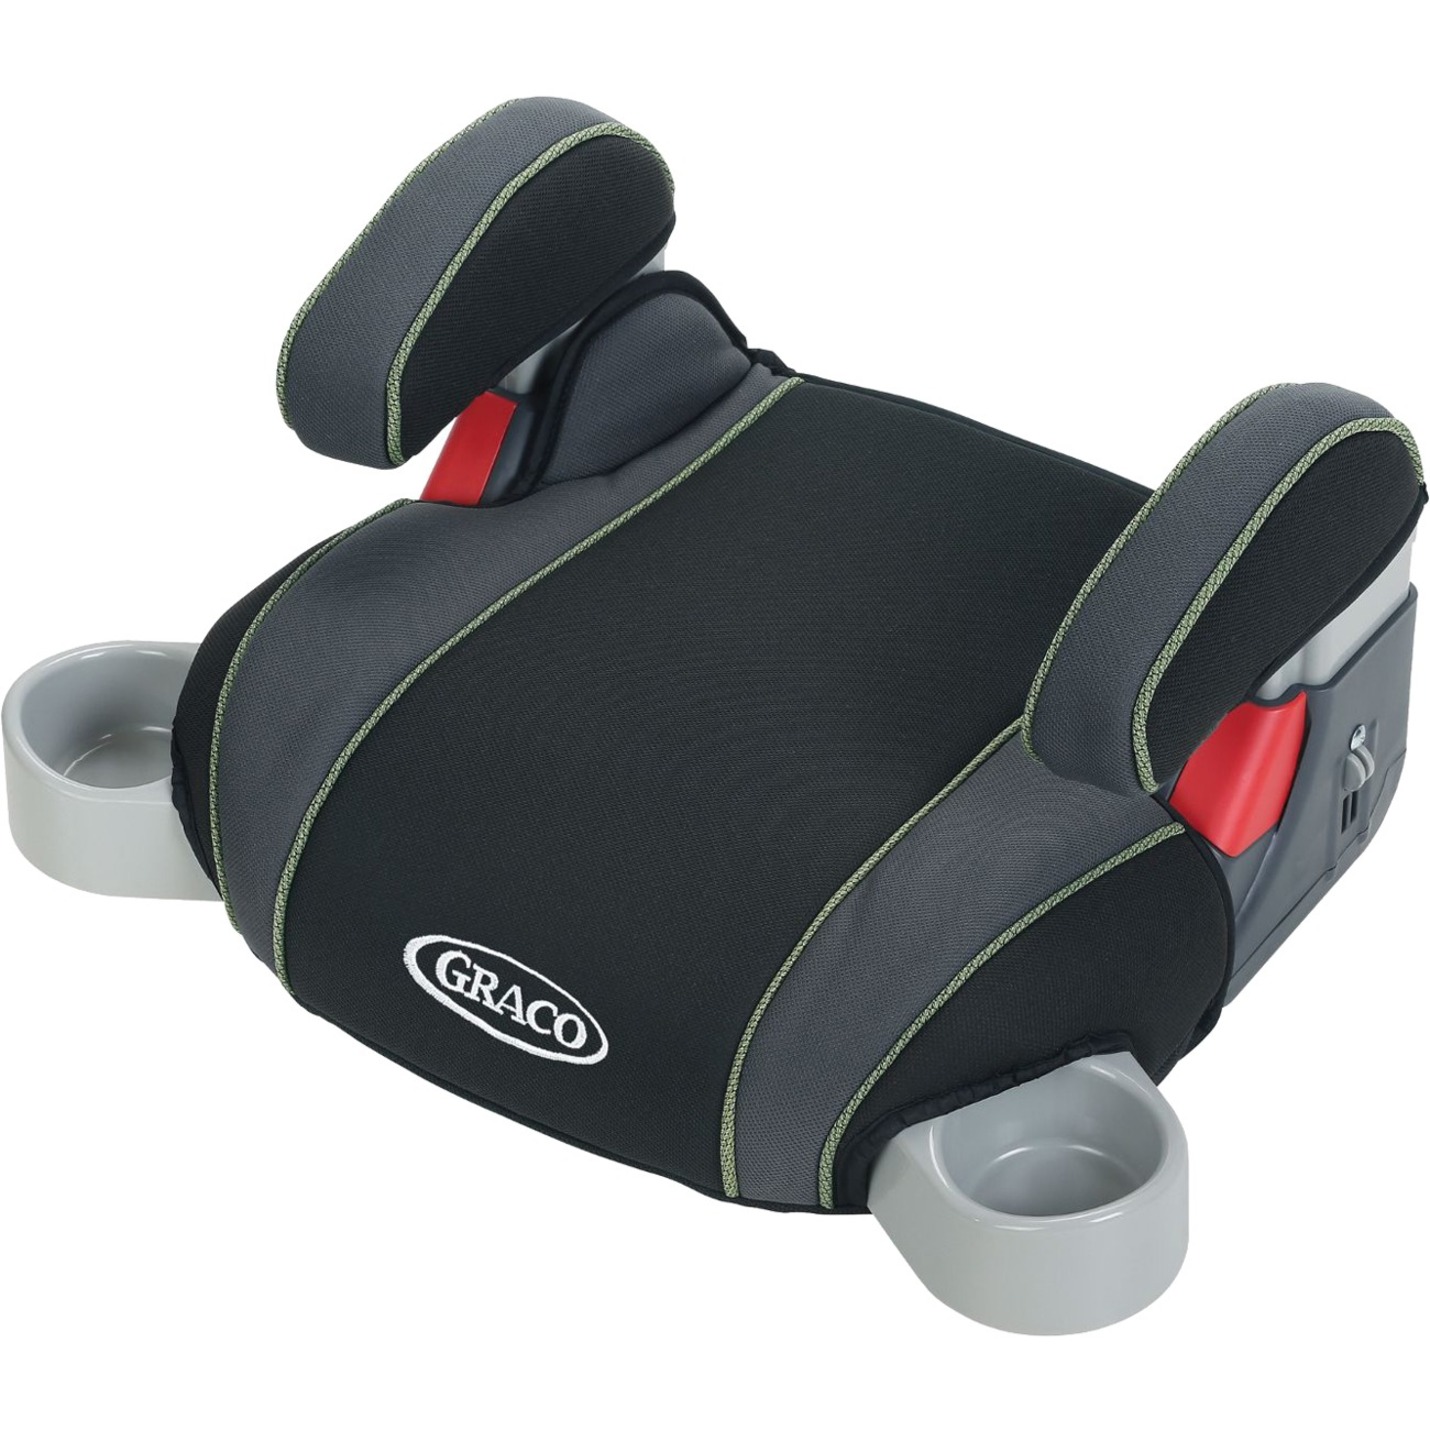 Graco Backless TurboBooster Car Seat Emory - image 1 of 3